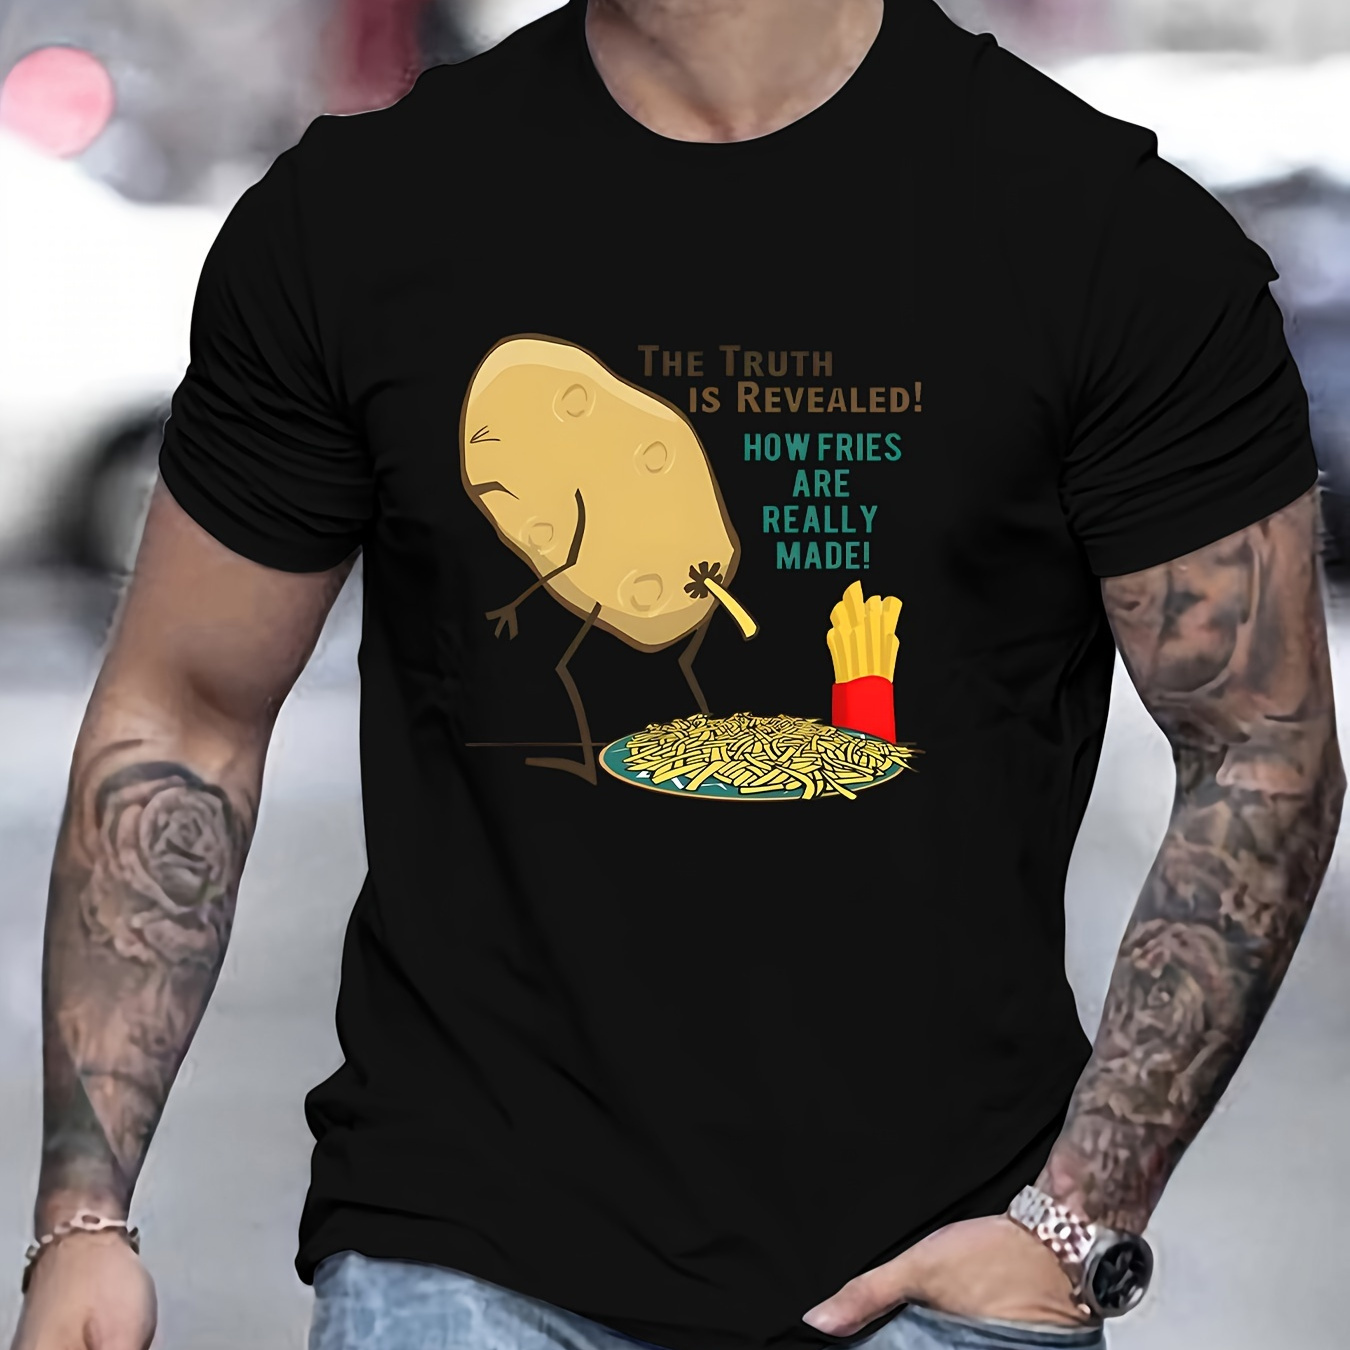 

The Truth Is Reviewed And Anime Potato And French Fries Graphic Print, Men's Novel Graphic Design T-shirt, Casual Comfy Tees For Summer, Men's Clothing Tops For Daily Activities